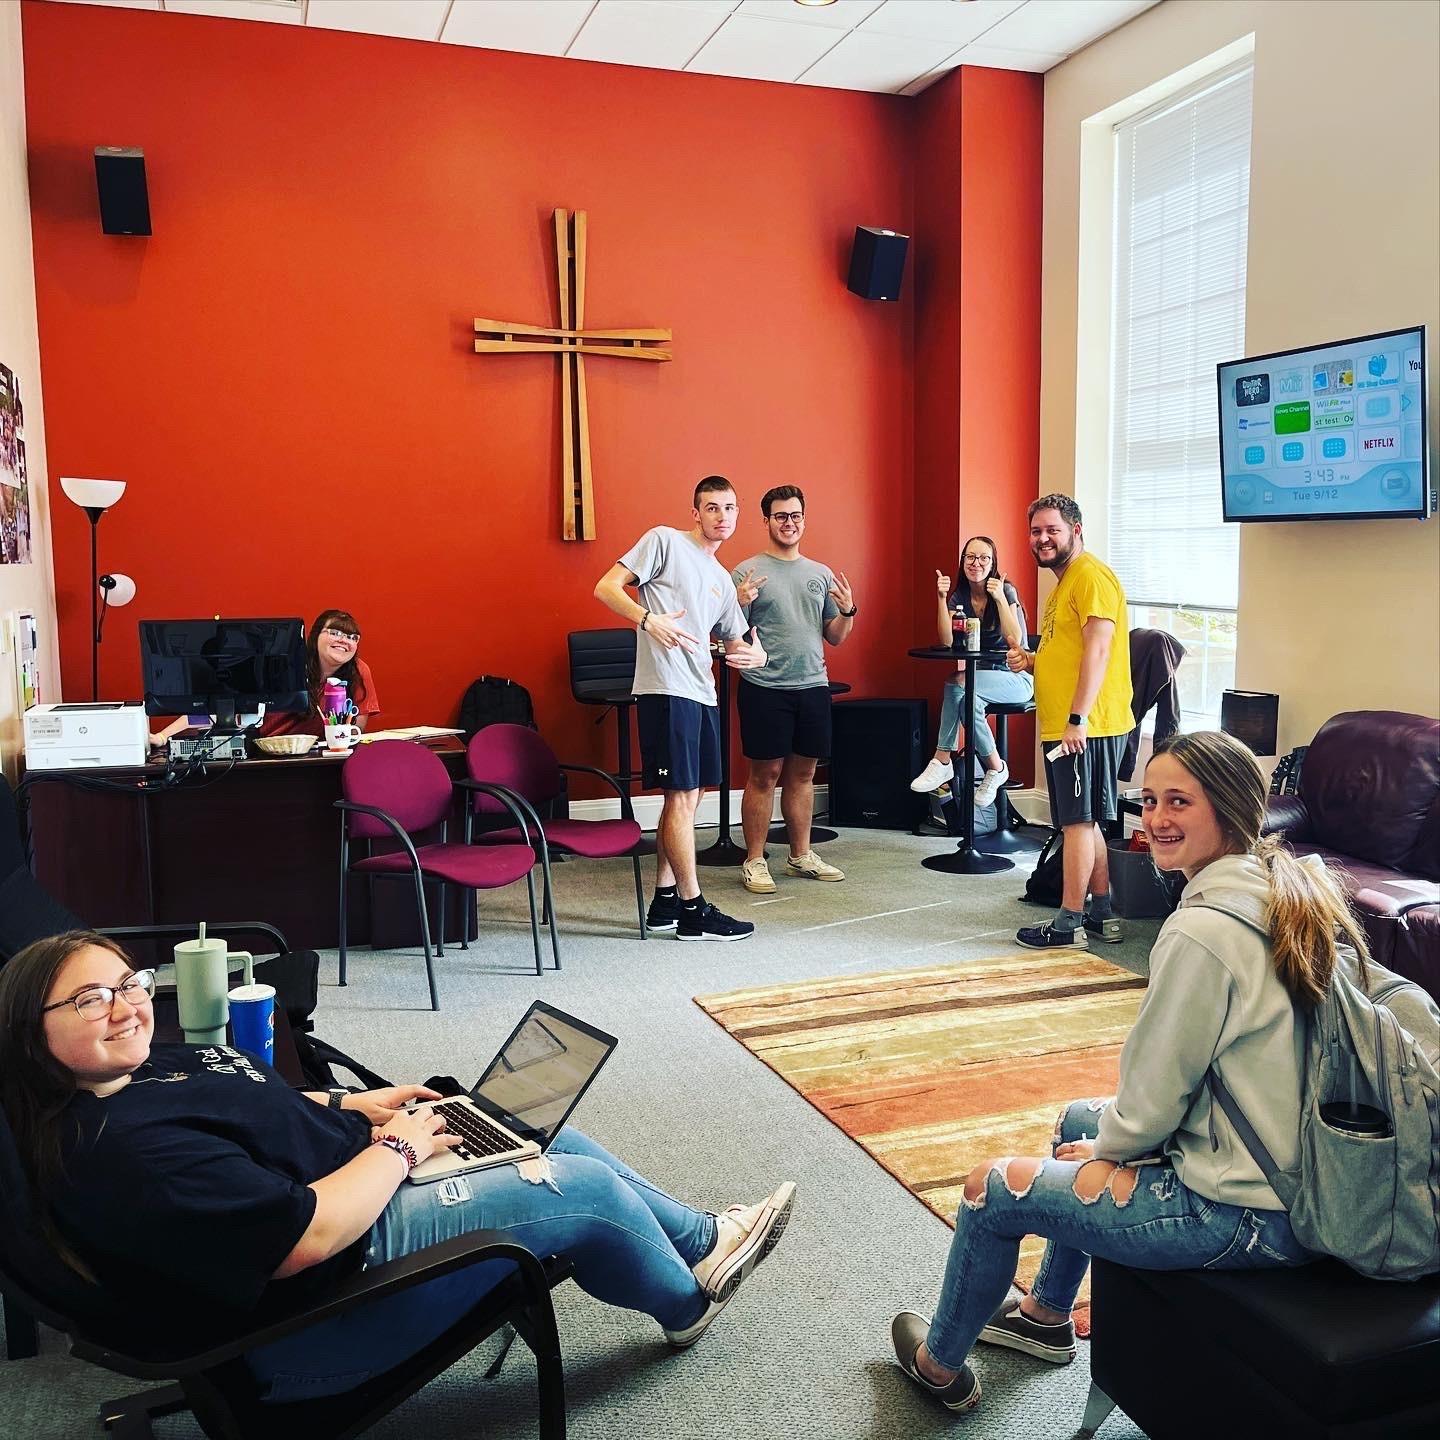 Students gather in the Center for Campus Ministry